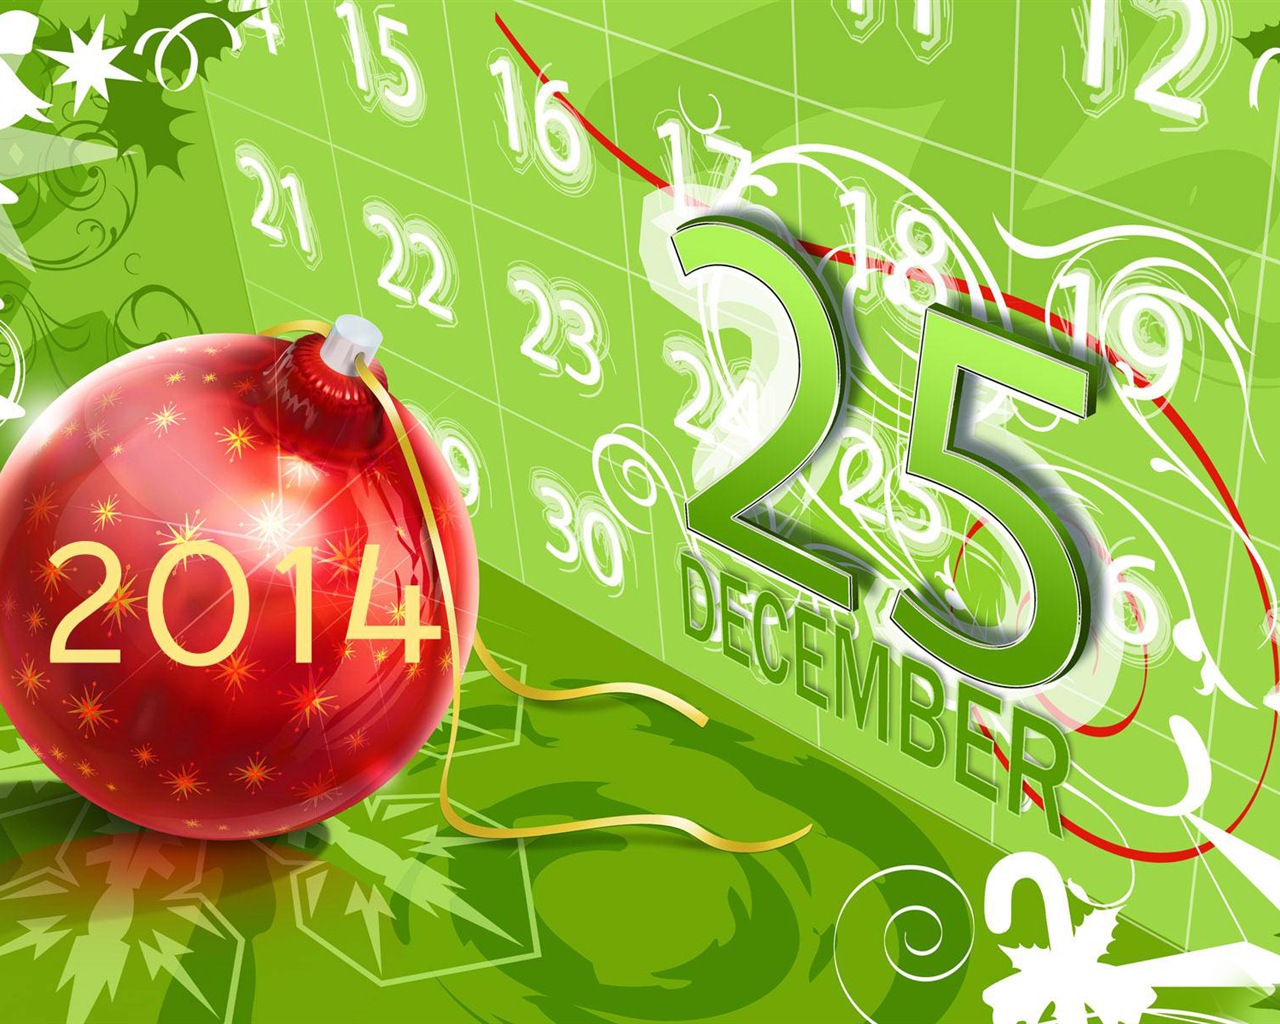 2014 New Year Theme HD Wallpapers (1) #6 - 1280x1024